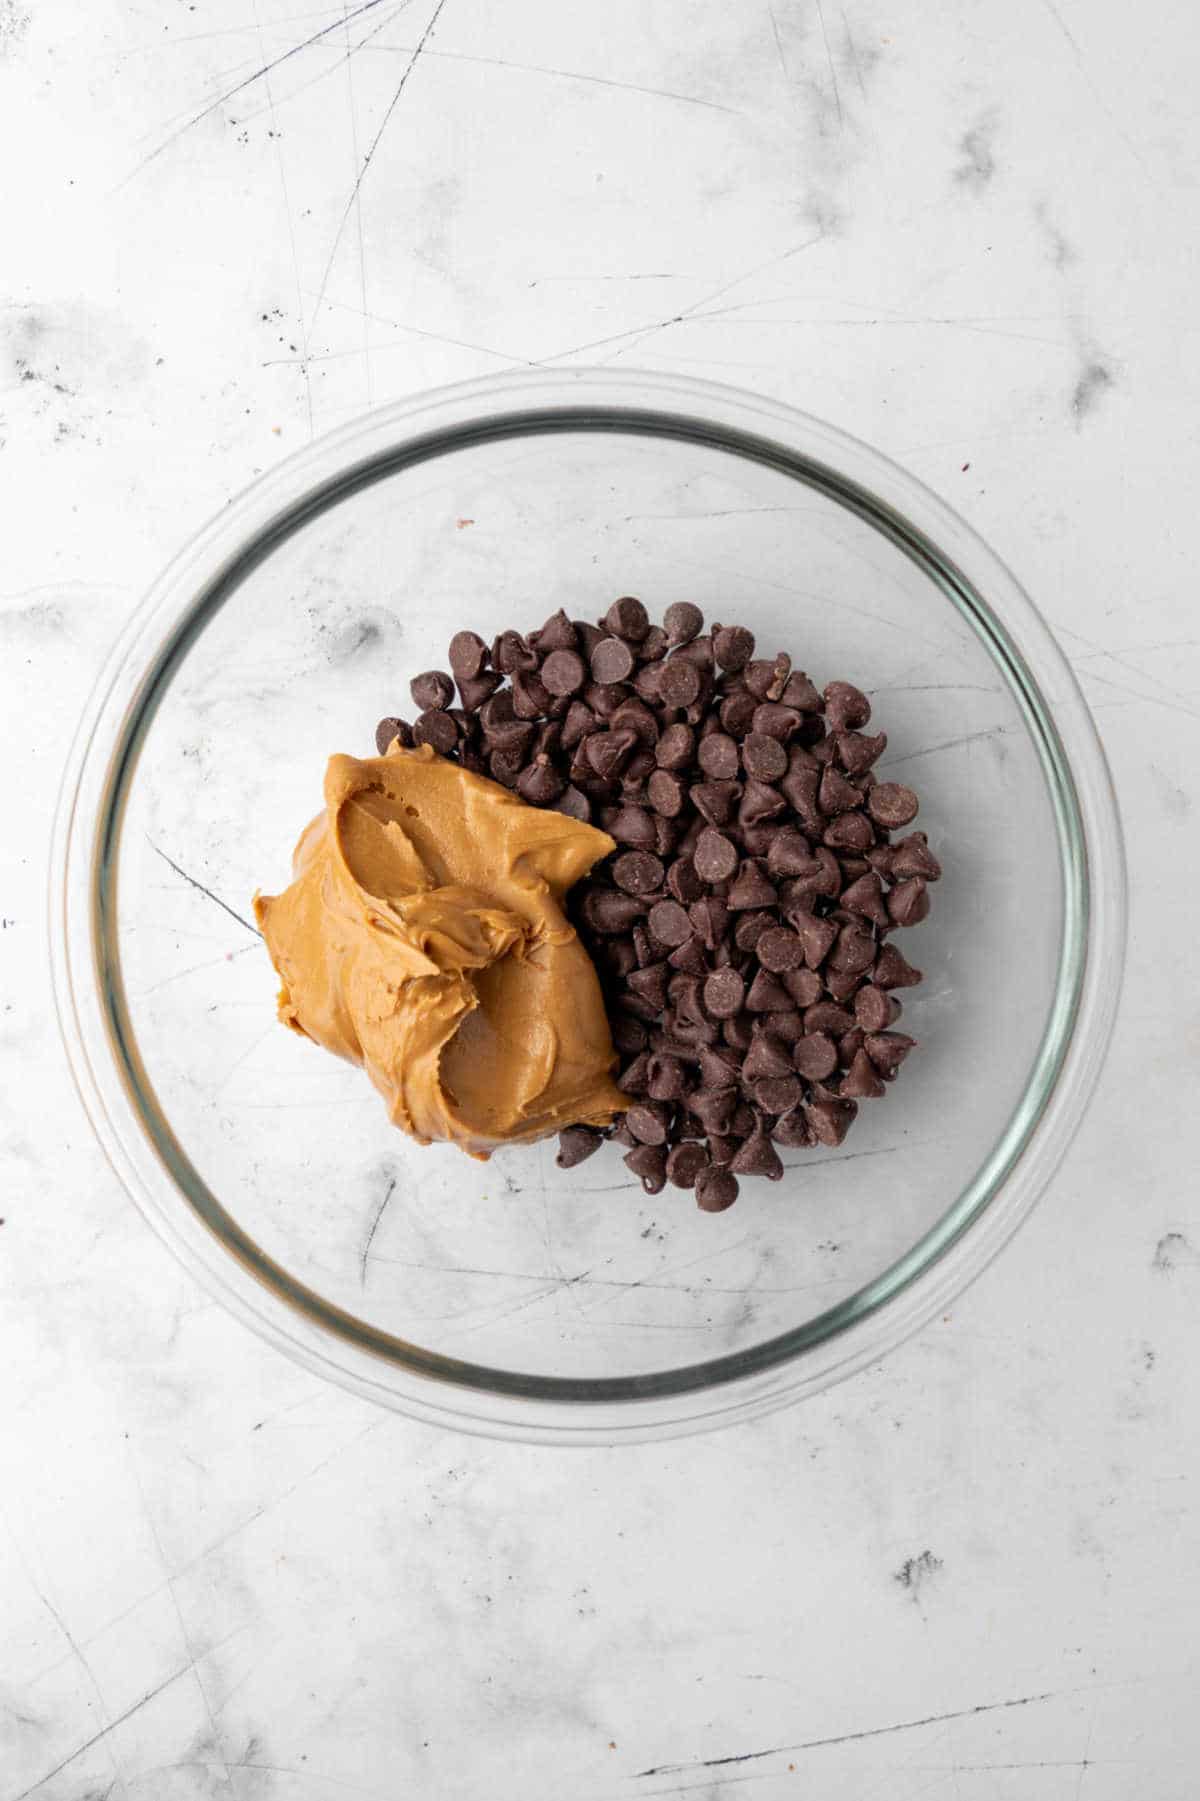 Peanut butter and chocolate chips in a glass mixing bowl. 